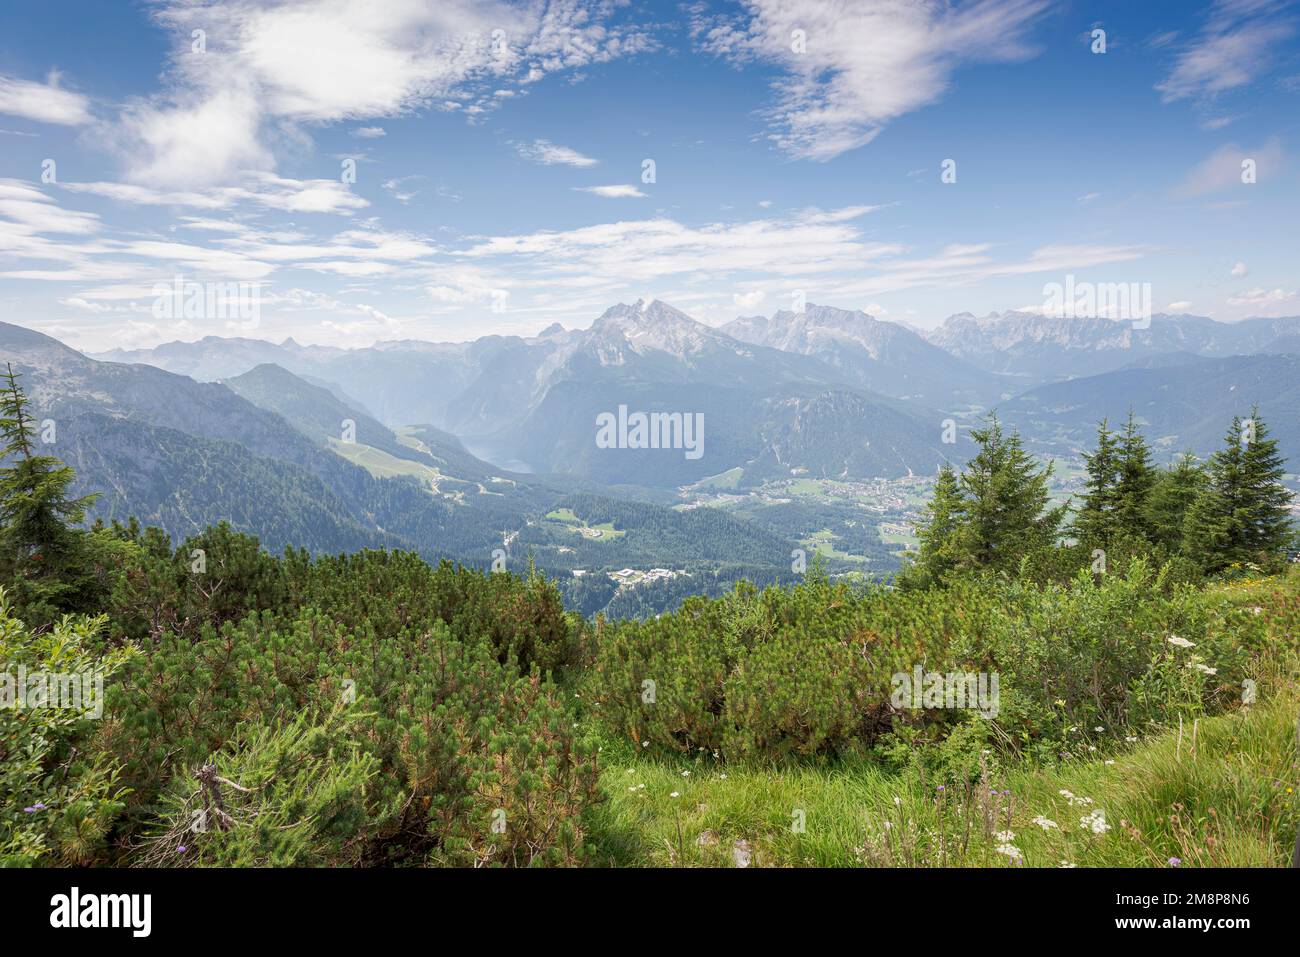 Views of the Bavarian Alps from de Eagle’s Nest (Kehlsteinhaus in German), in the Berchtesgadener Land district of Bavaria in Germany Stock Photo